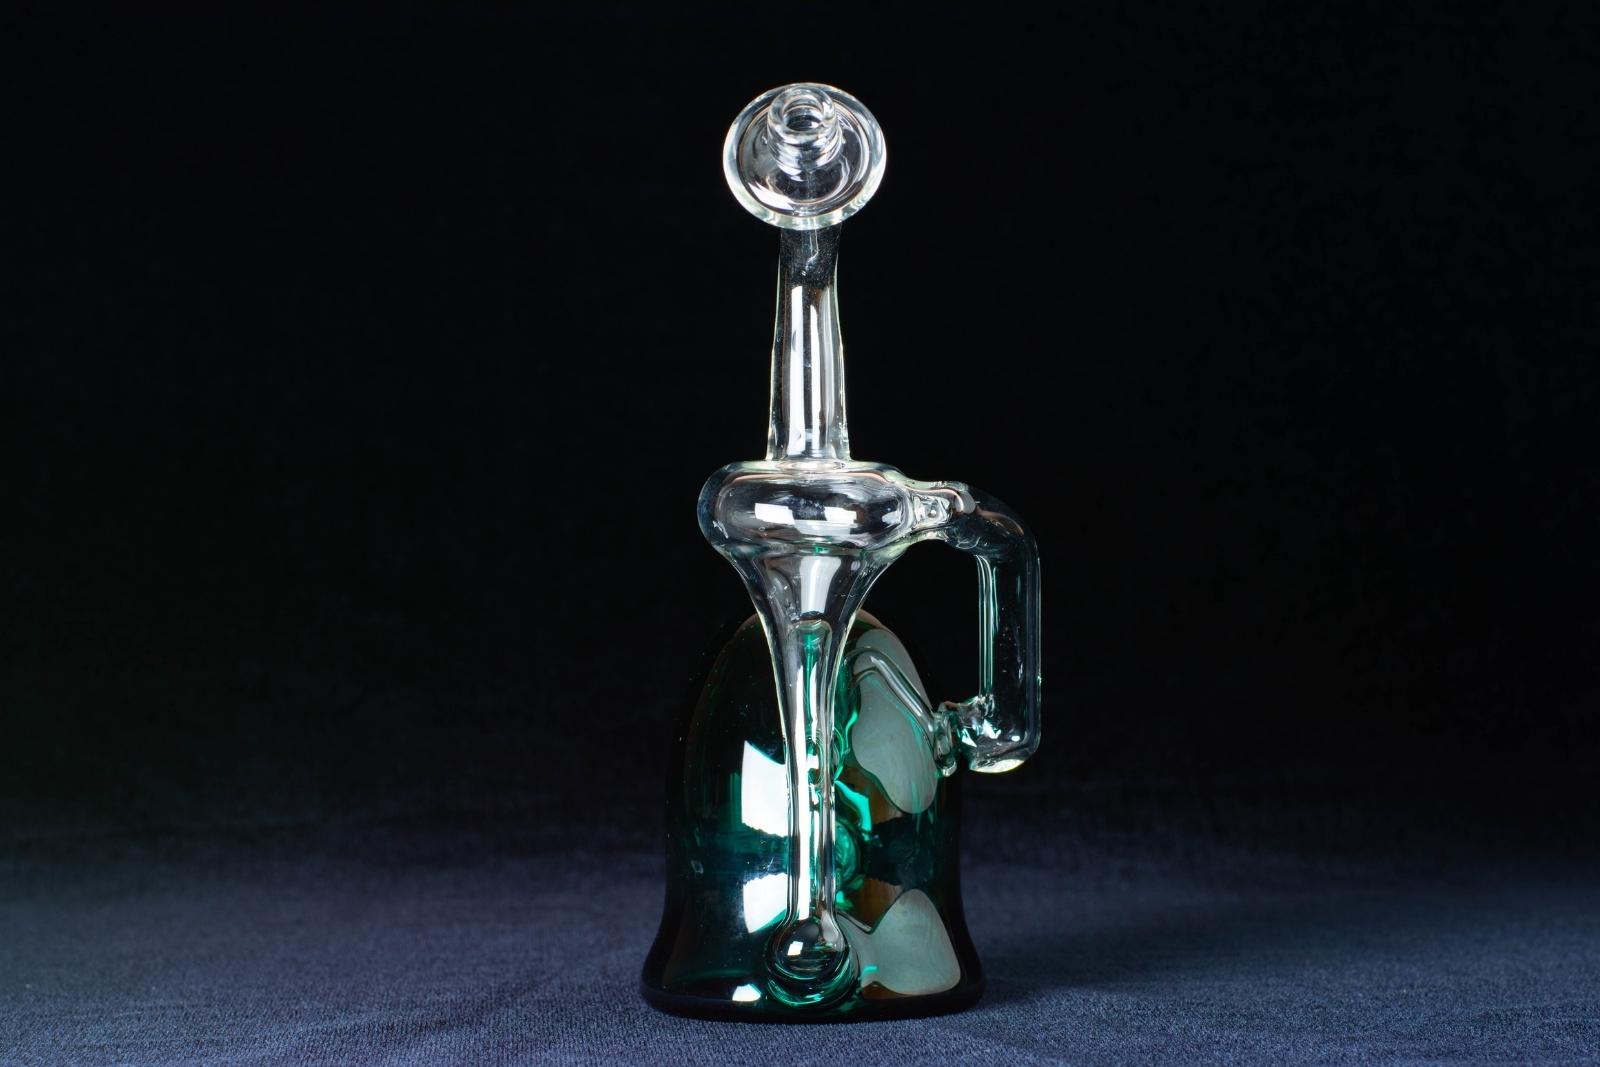 A green 8-inch recycler made by Jack Glass Co., on a black background